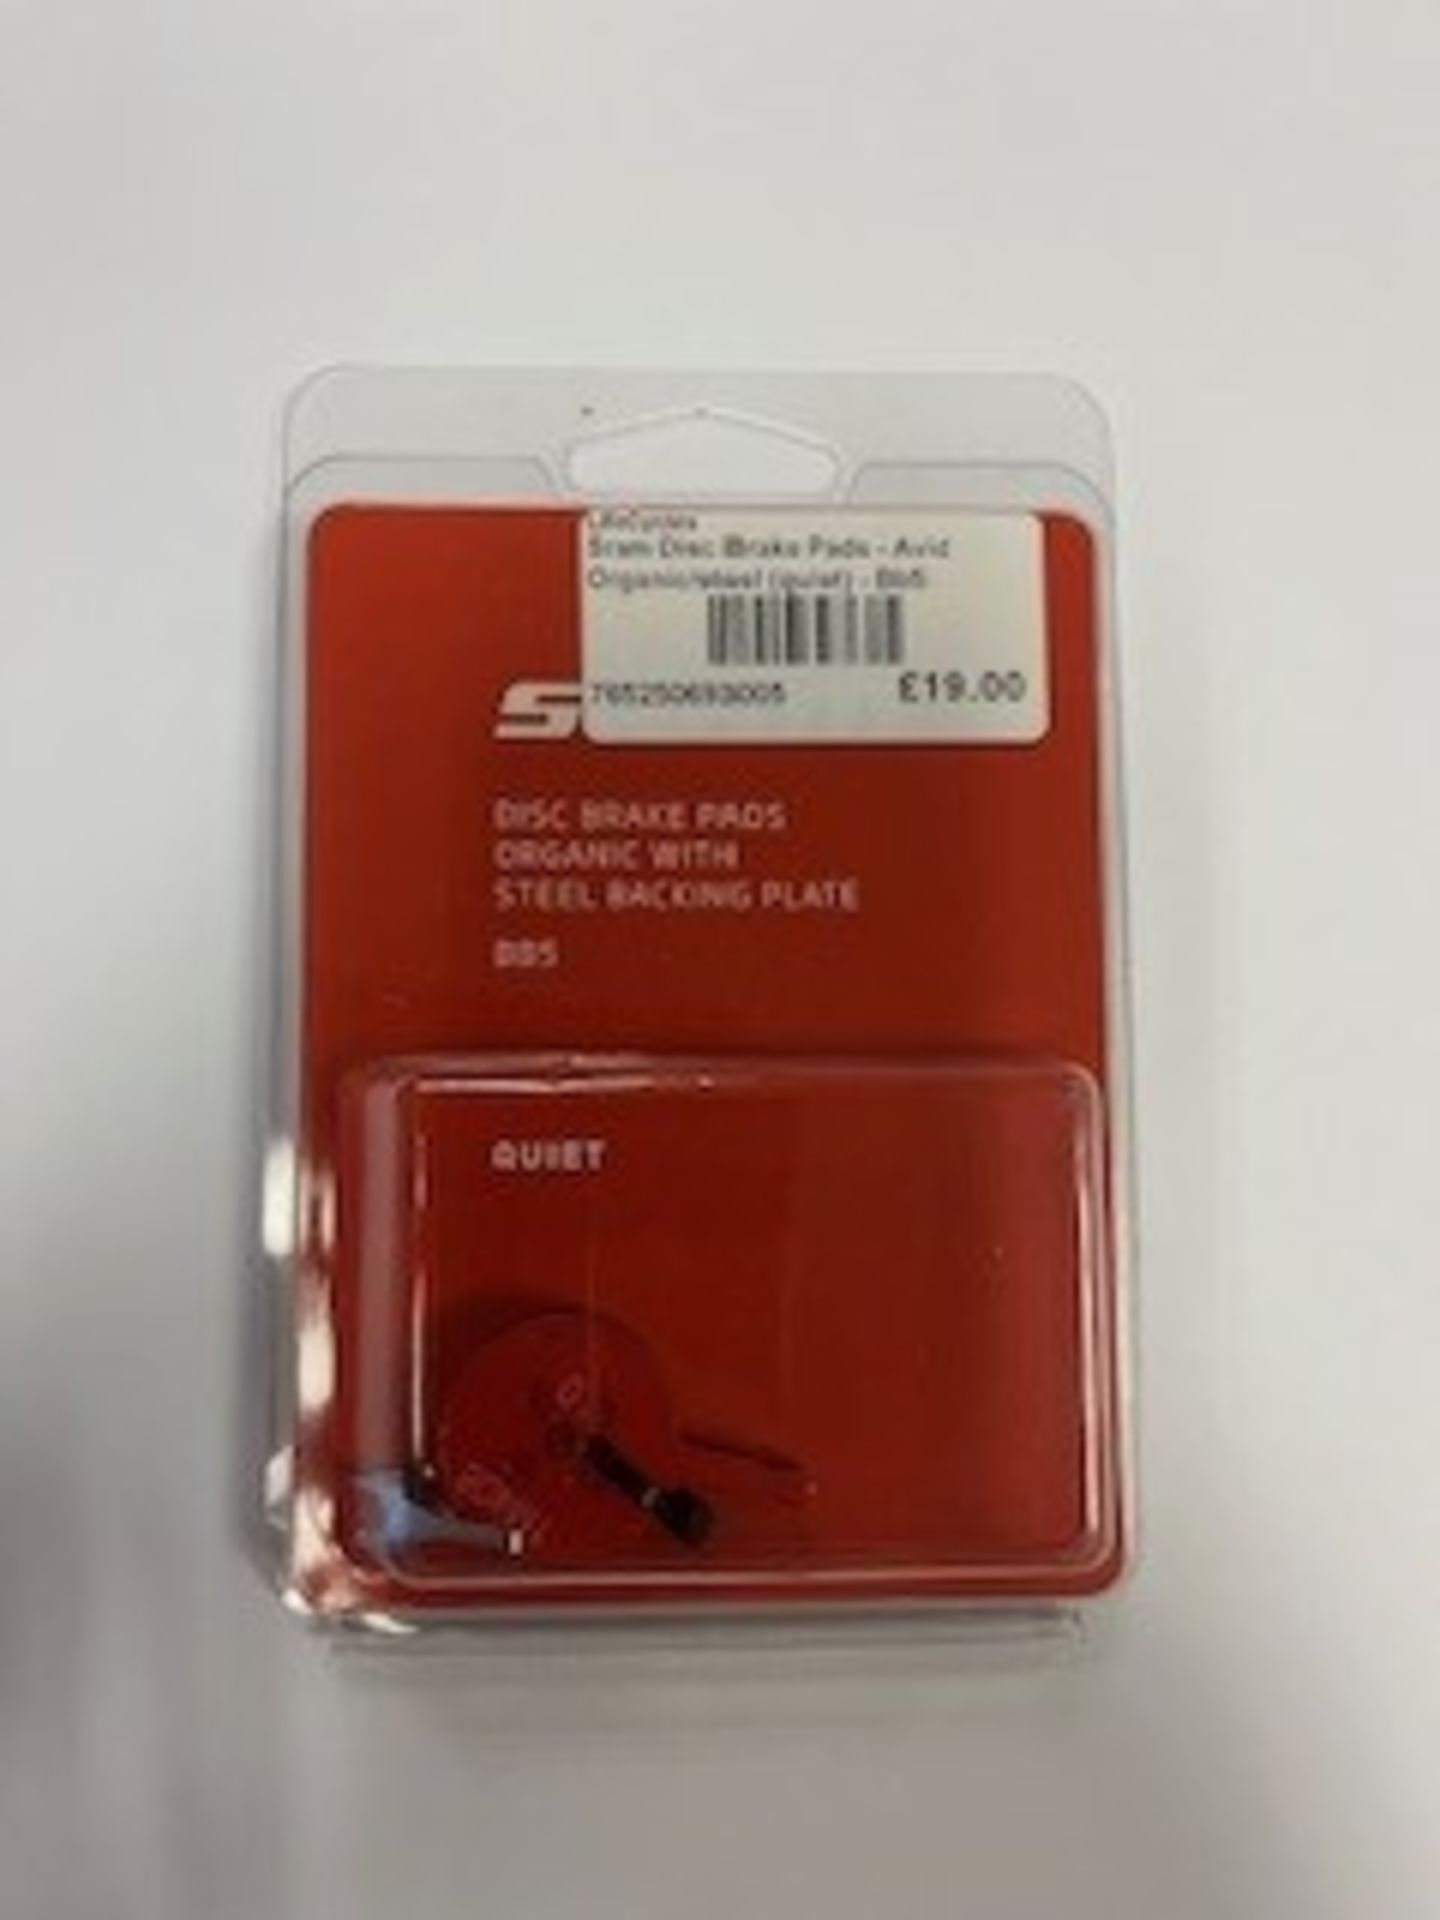 Sram Brake Pads to include 5x Disc Brake Pads Organic with Steel Backing Plate (HRD, LEVEL ULT, LEVE